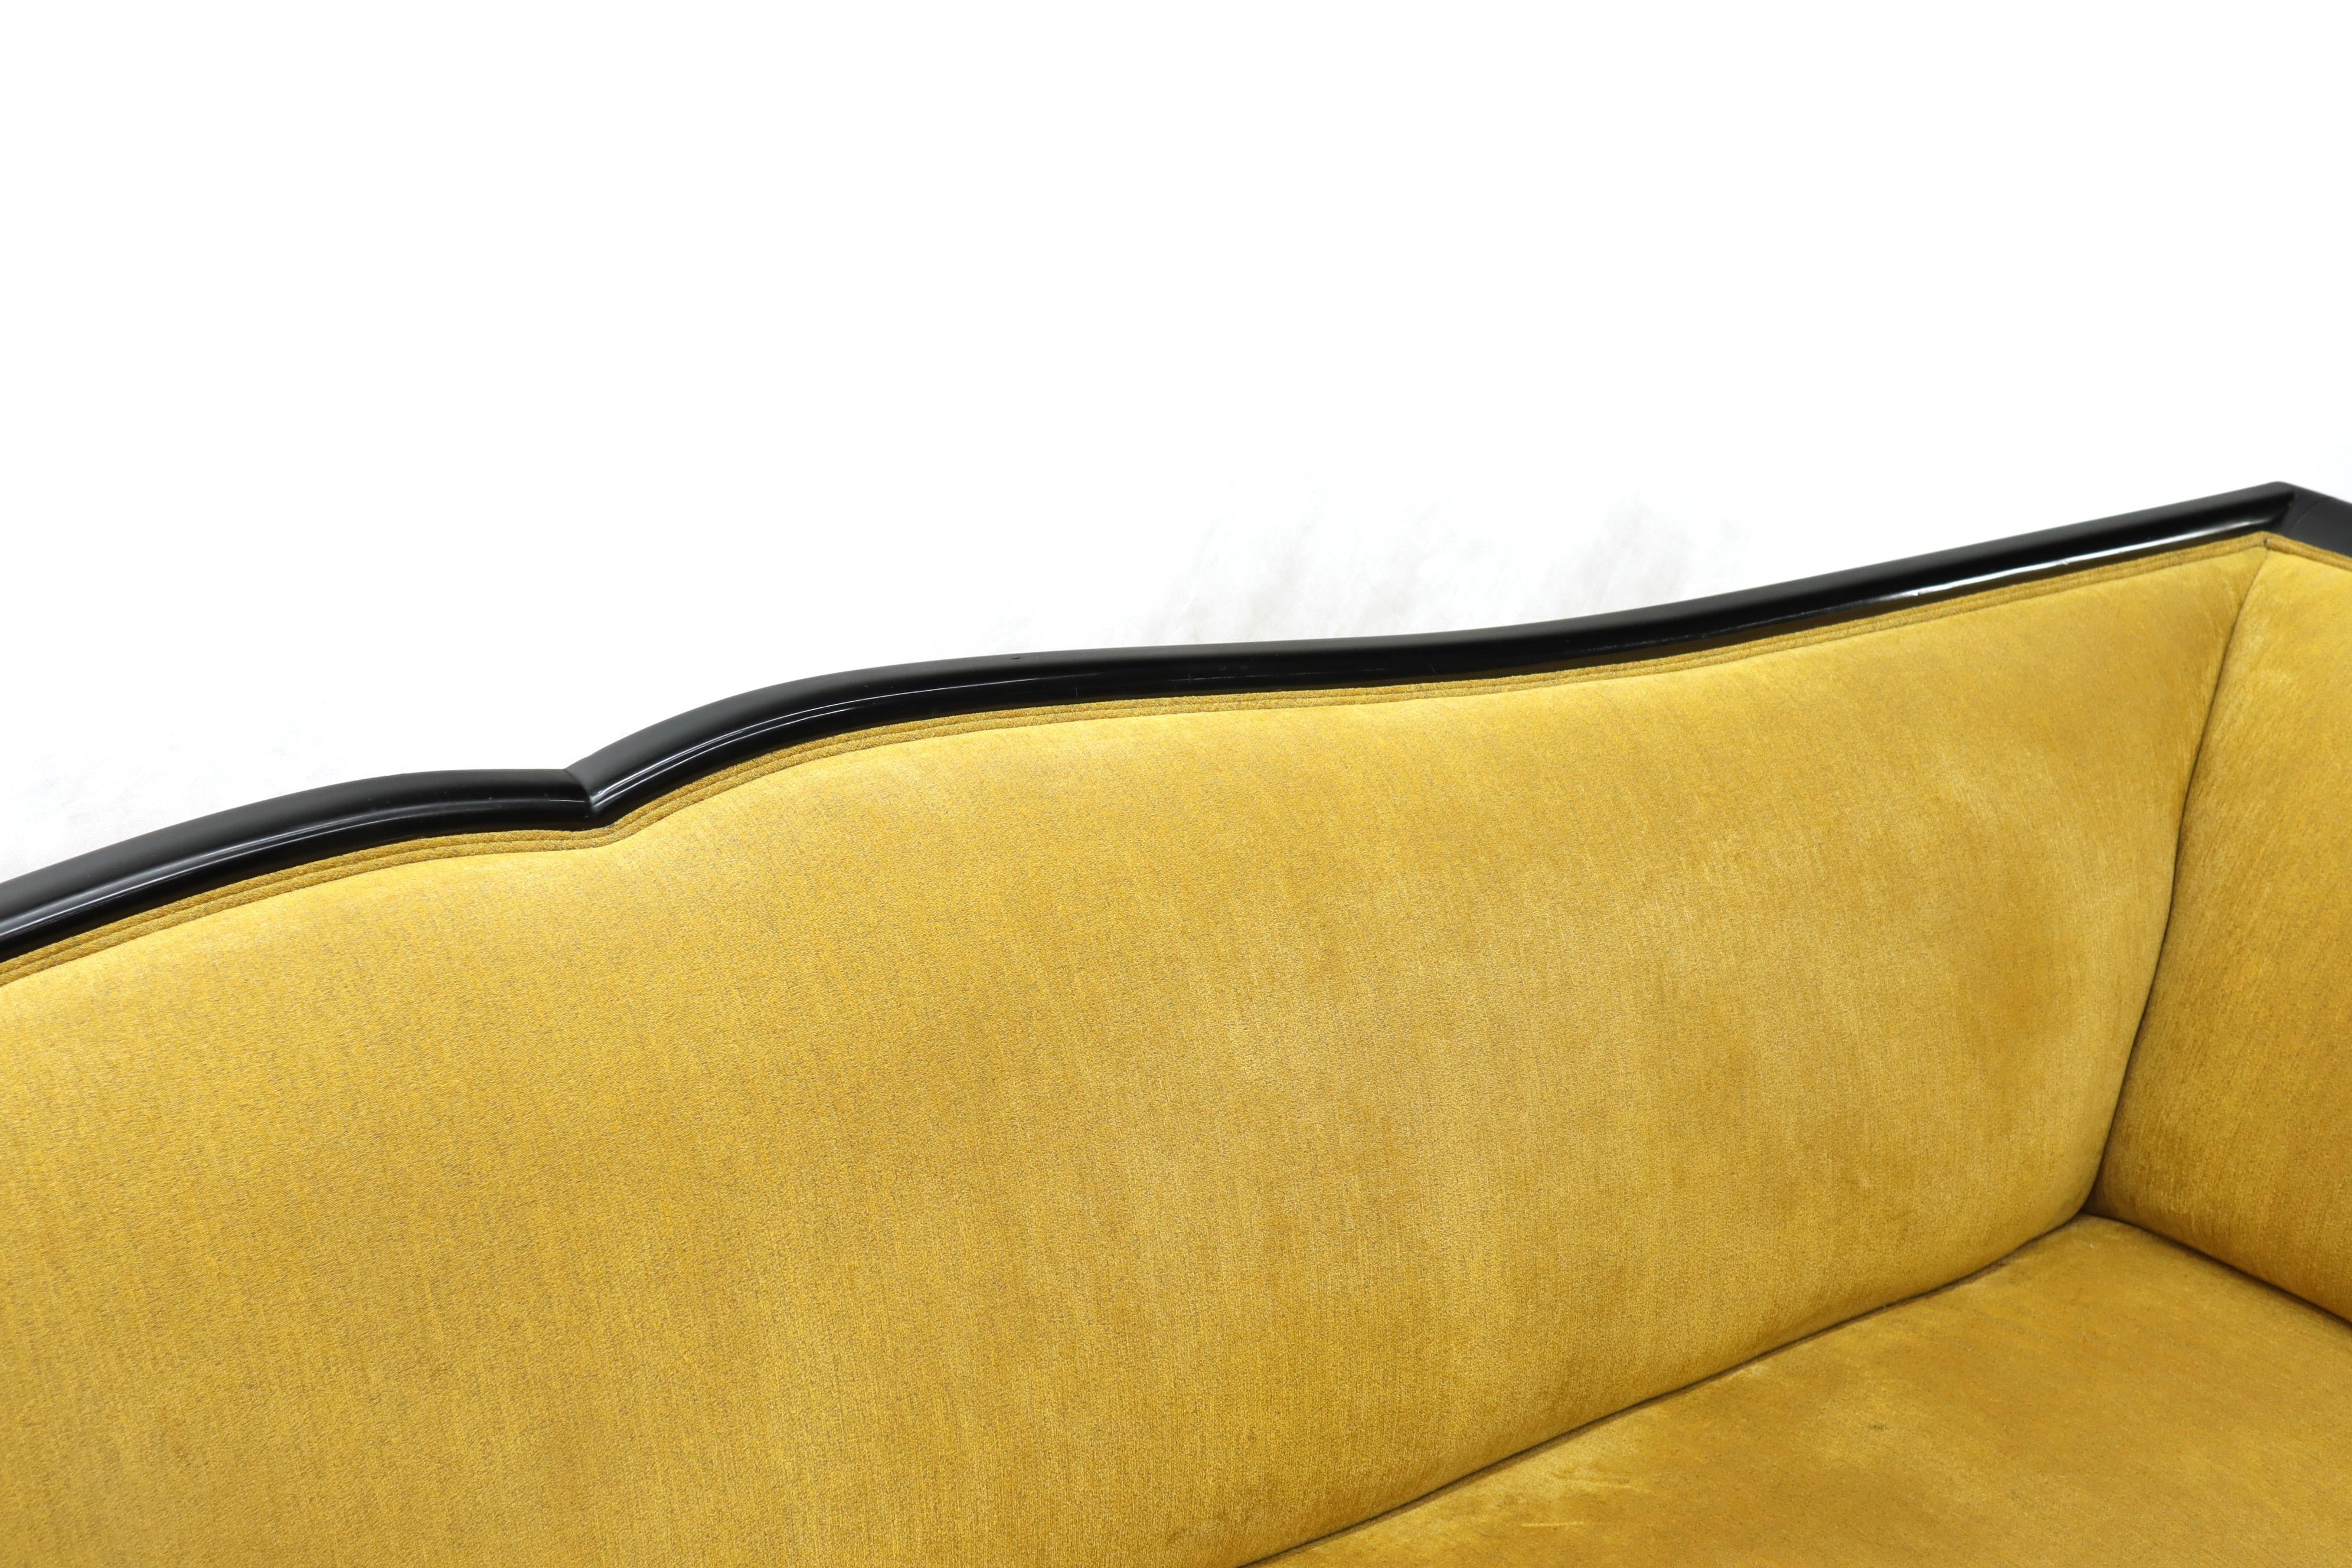 Large French Art Deco Rosewood Sofa in Gold Upholstery Scalloped Edge For Sale 2